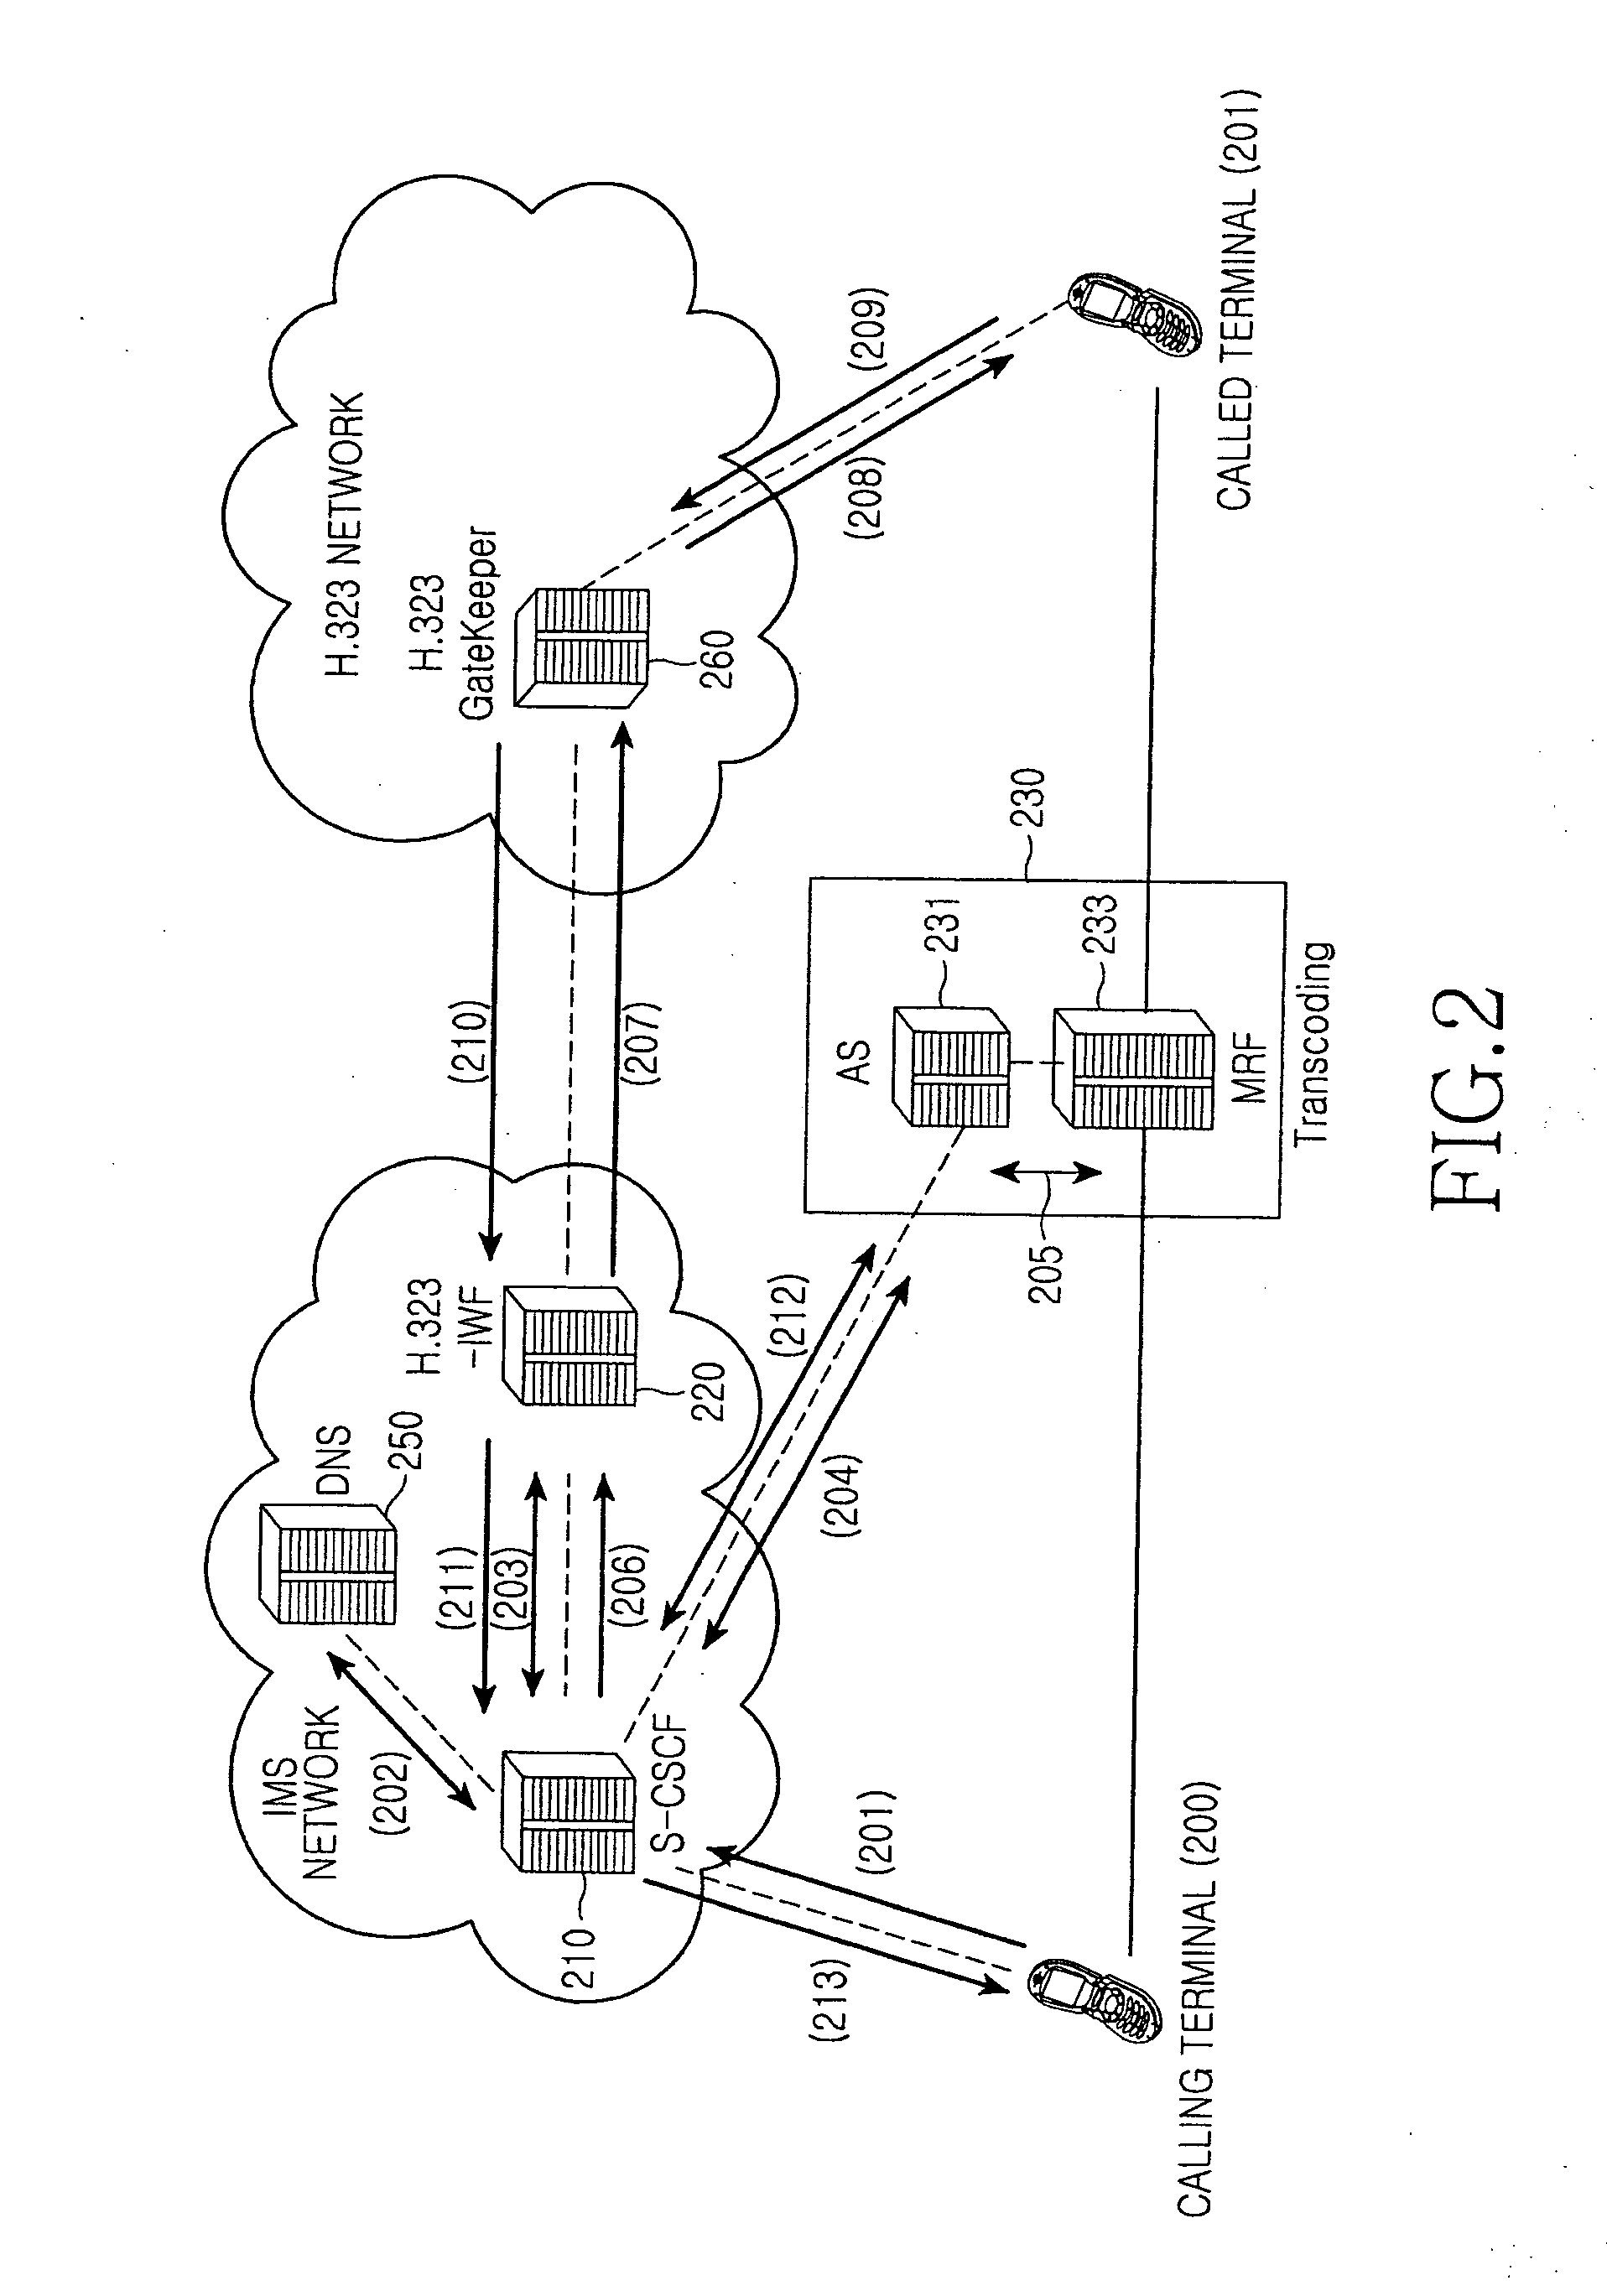 System and method for interworking between IMS network and H.323 network